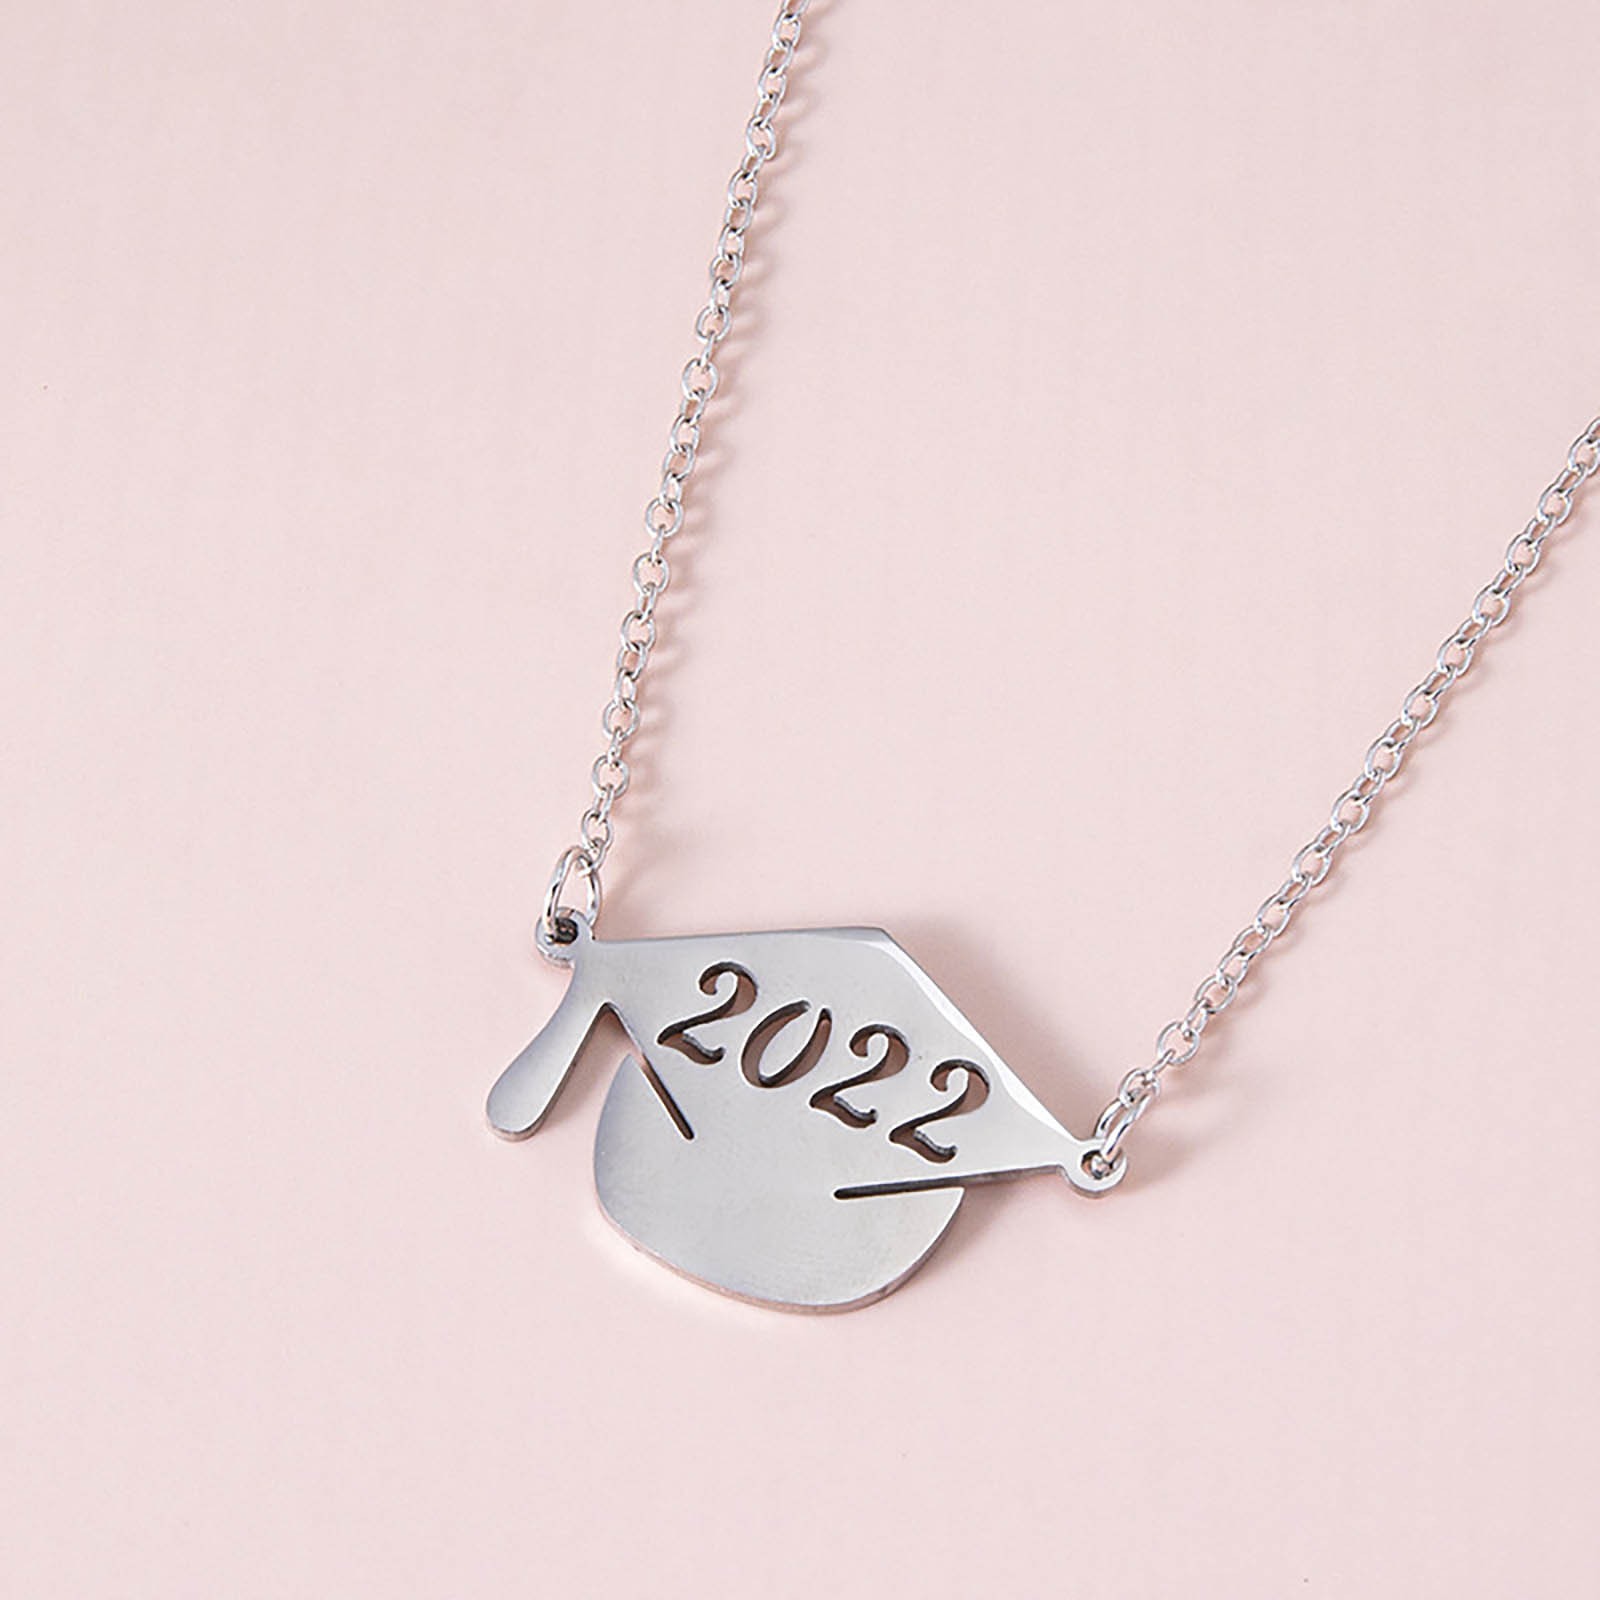 Apmemiss Clearance Graduation Gifts 2022 Graduation Gifts Pendant Necklace, Ladies Necklace Memorial Pendant Jewelry Gift, College Graduation Necklace Friendship Gifts For Her Graduation Decorations - image 4 of 8